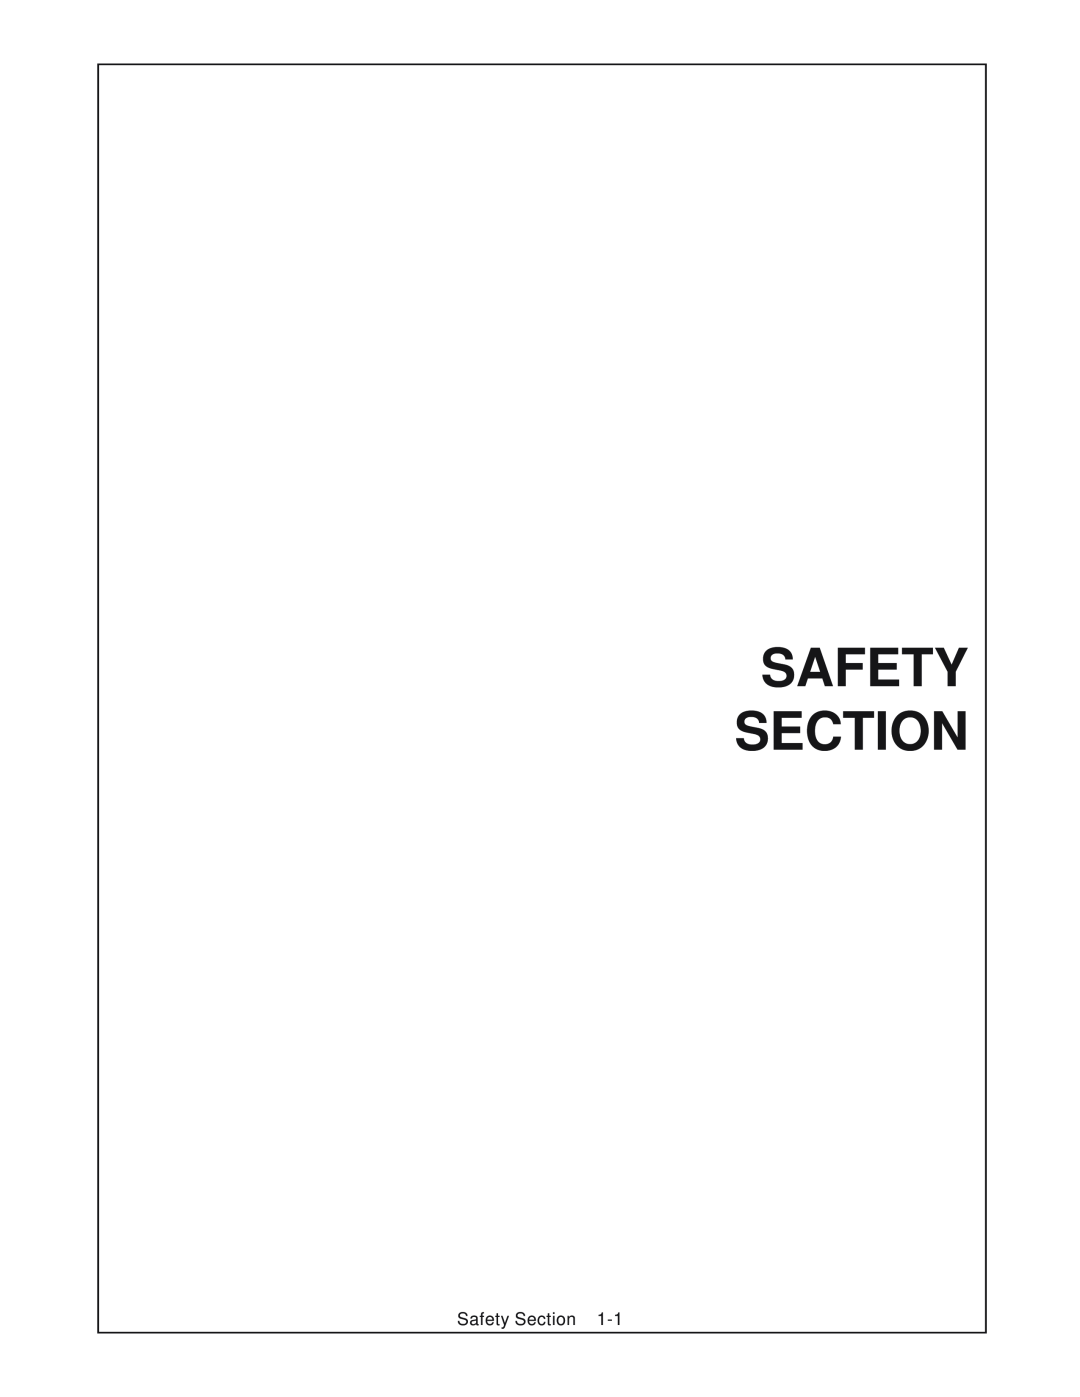 Grizzly 52 manual Safety Section 